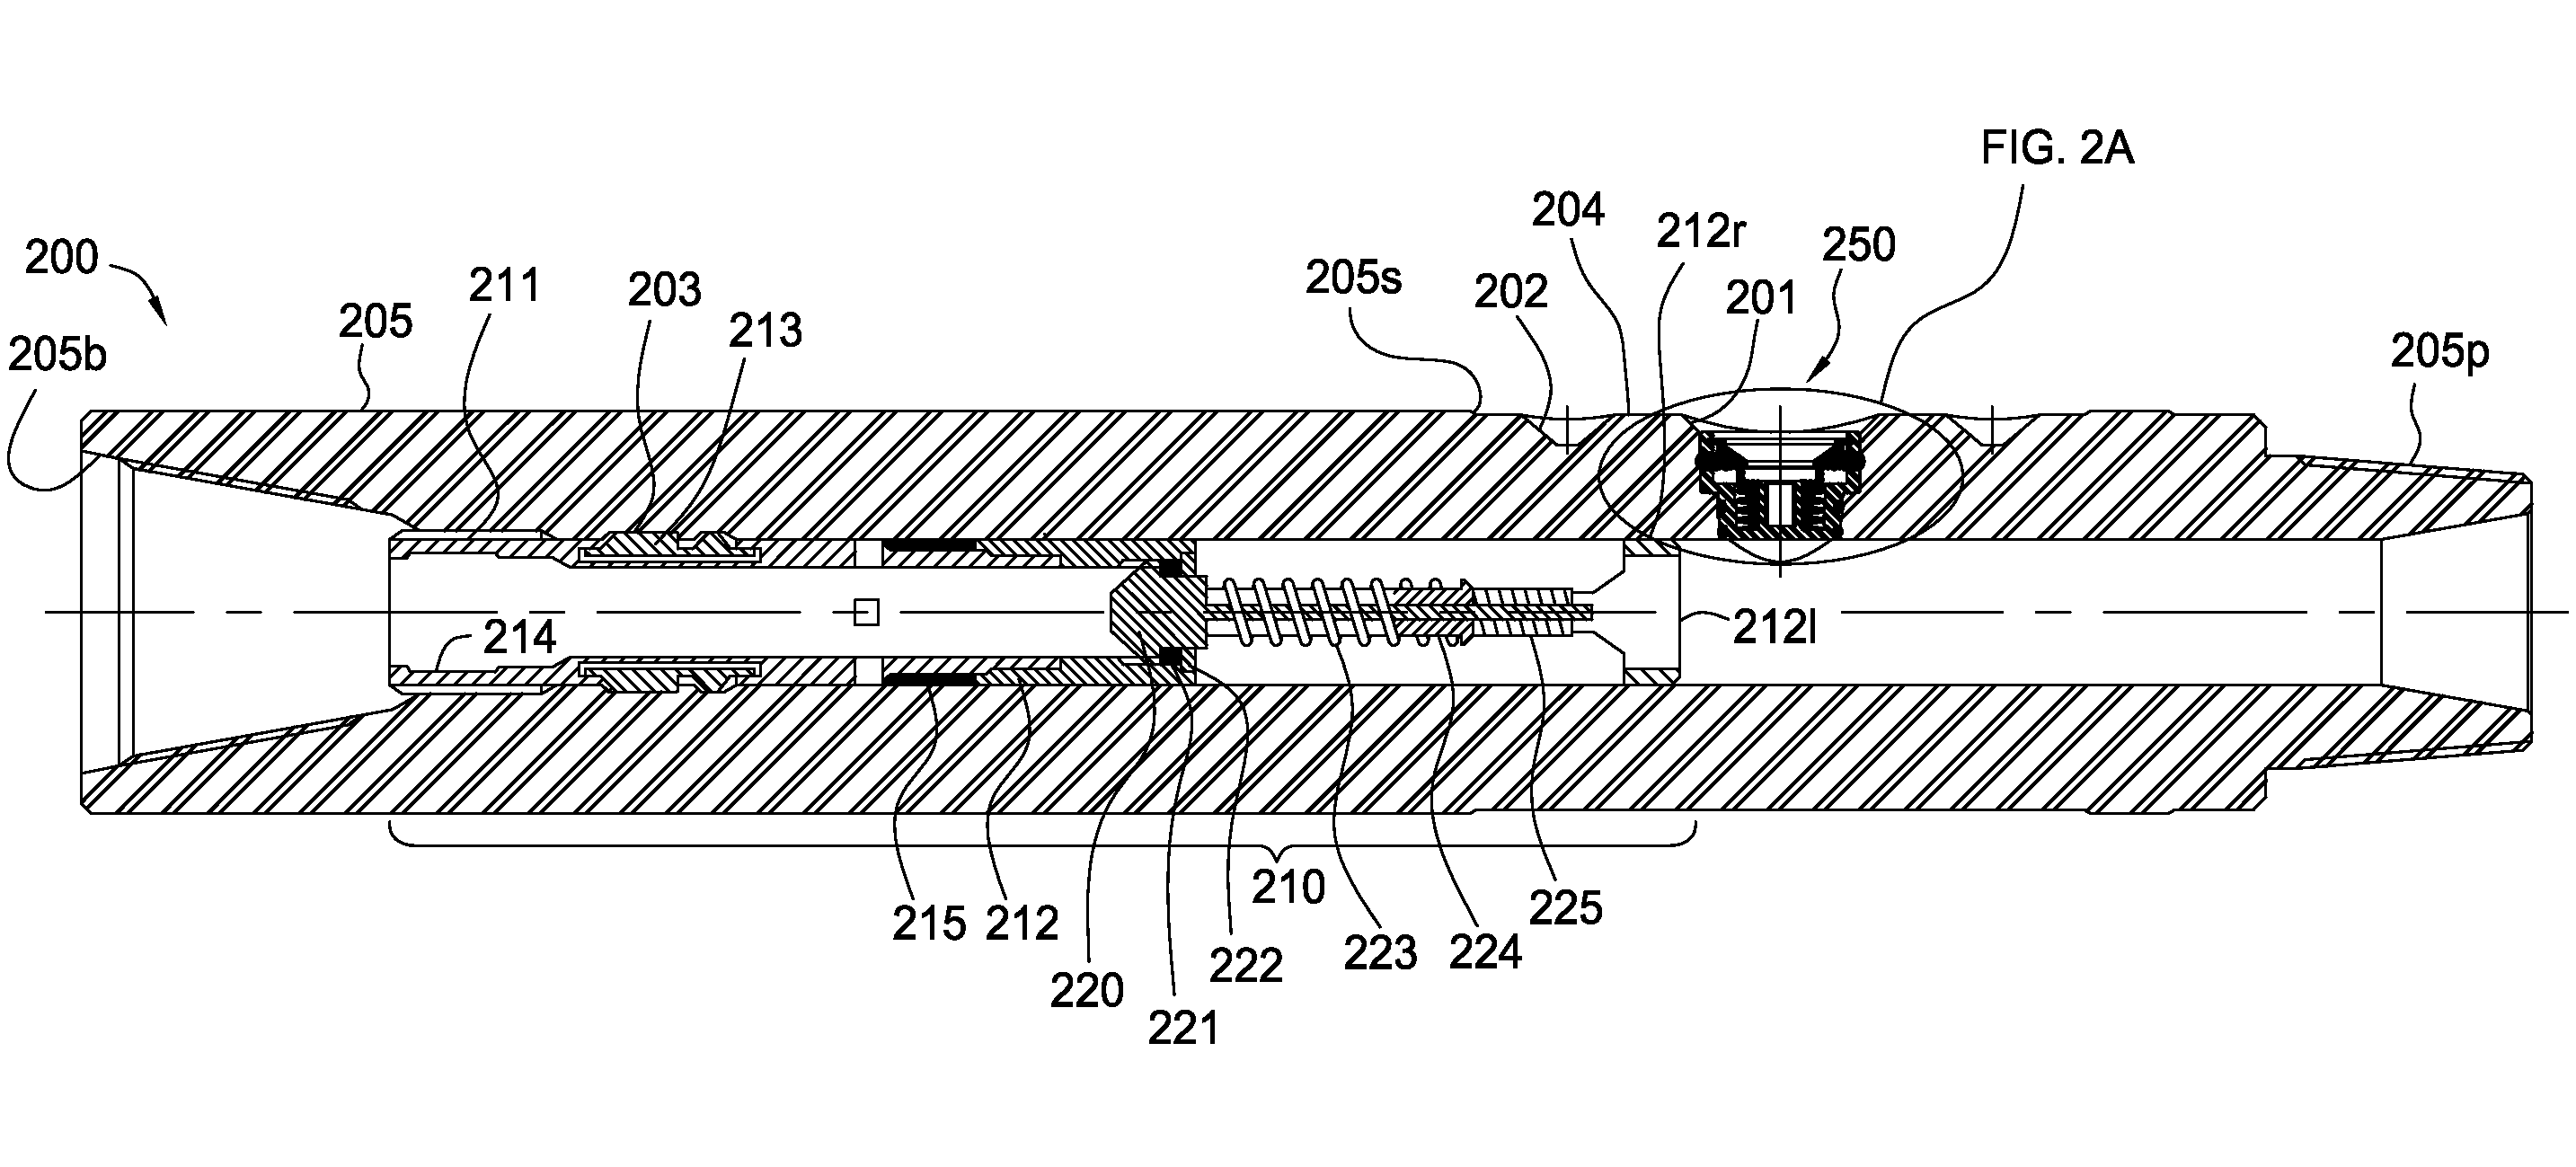 Continuous flow drilling systems and methods